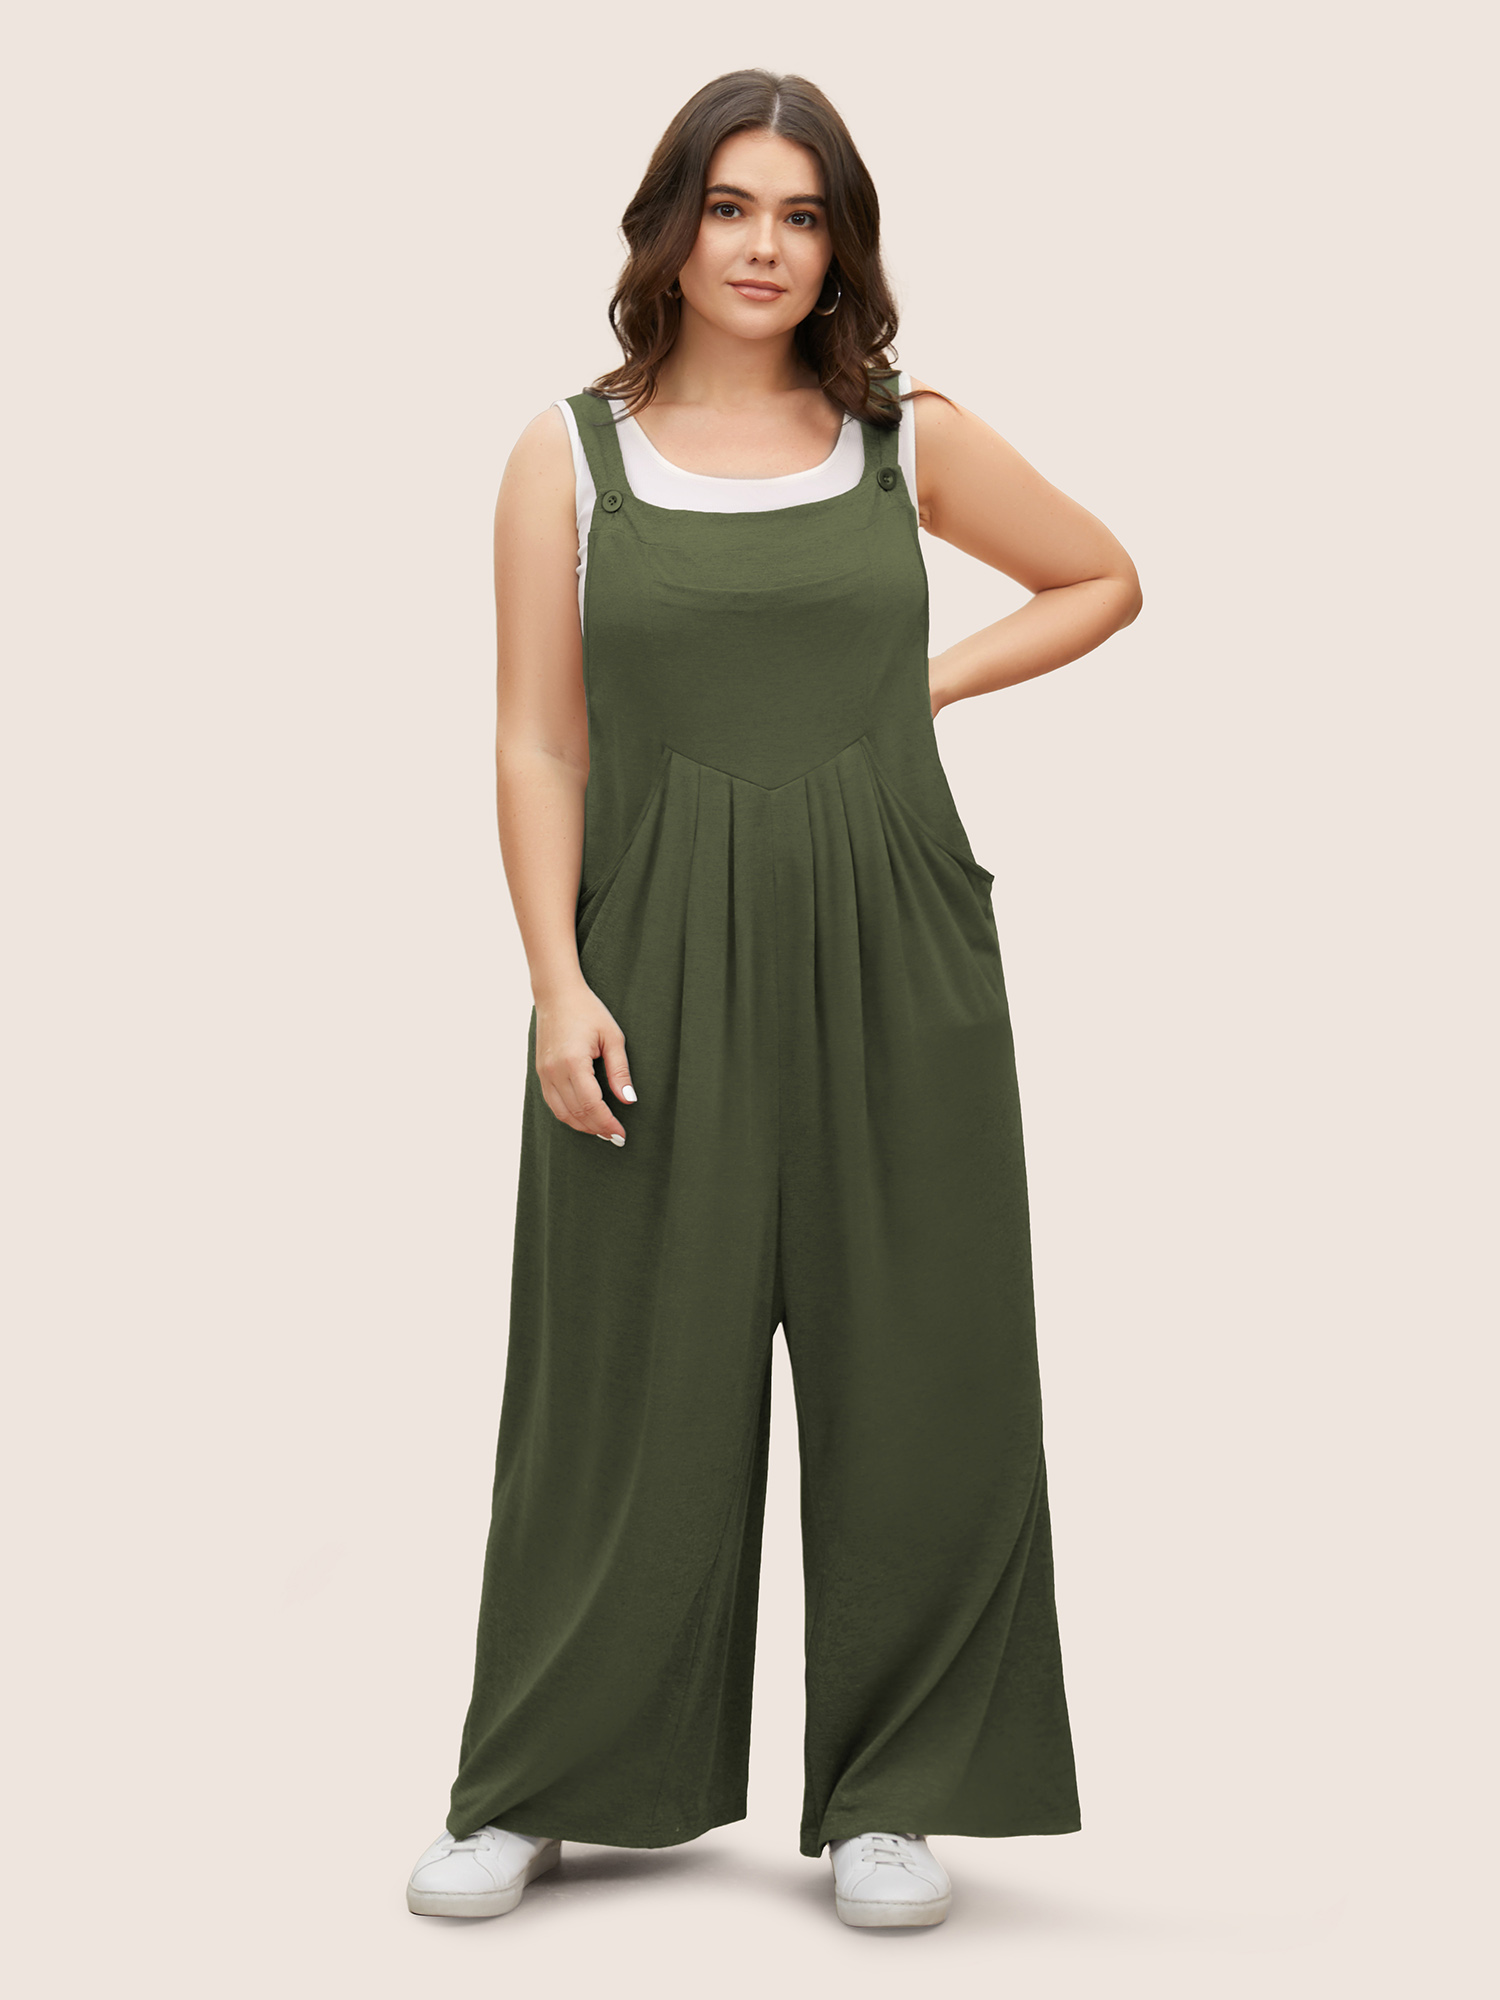 

Plus Size ArmyGreen Supersoft Essentials Solid Pleated Pocket Jumpsuit Women Casual Sleeveless Non Everyday Loose Jumpsuits BloomChic